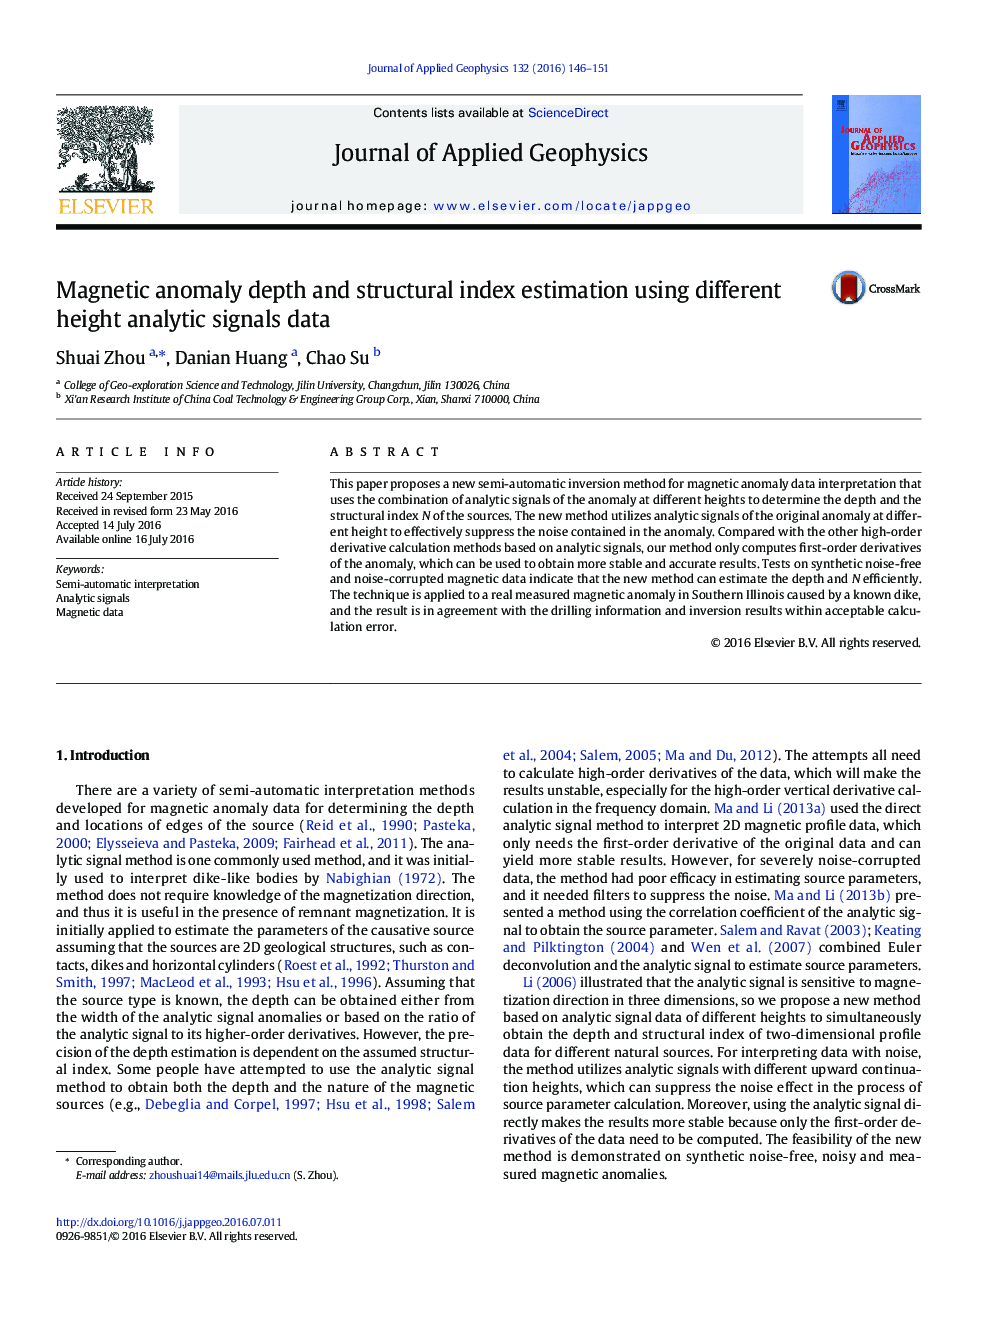 Magnetic anomaly depth and structural index estimation using different height analytic signals data